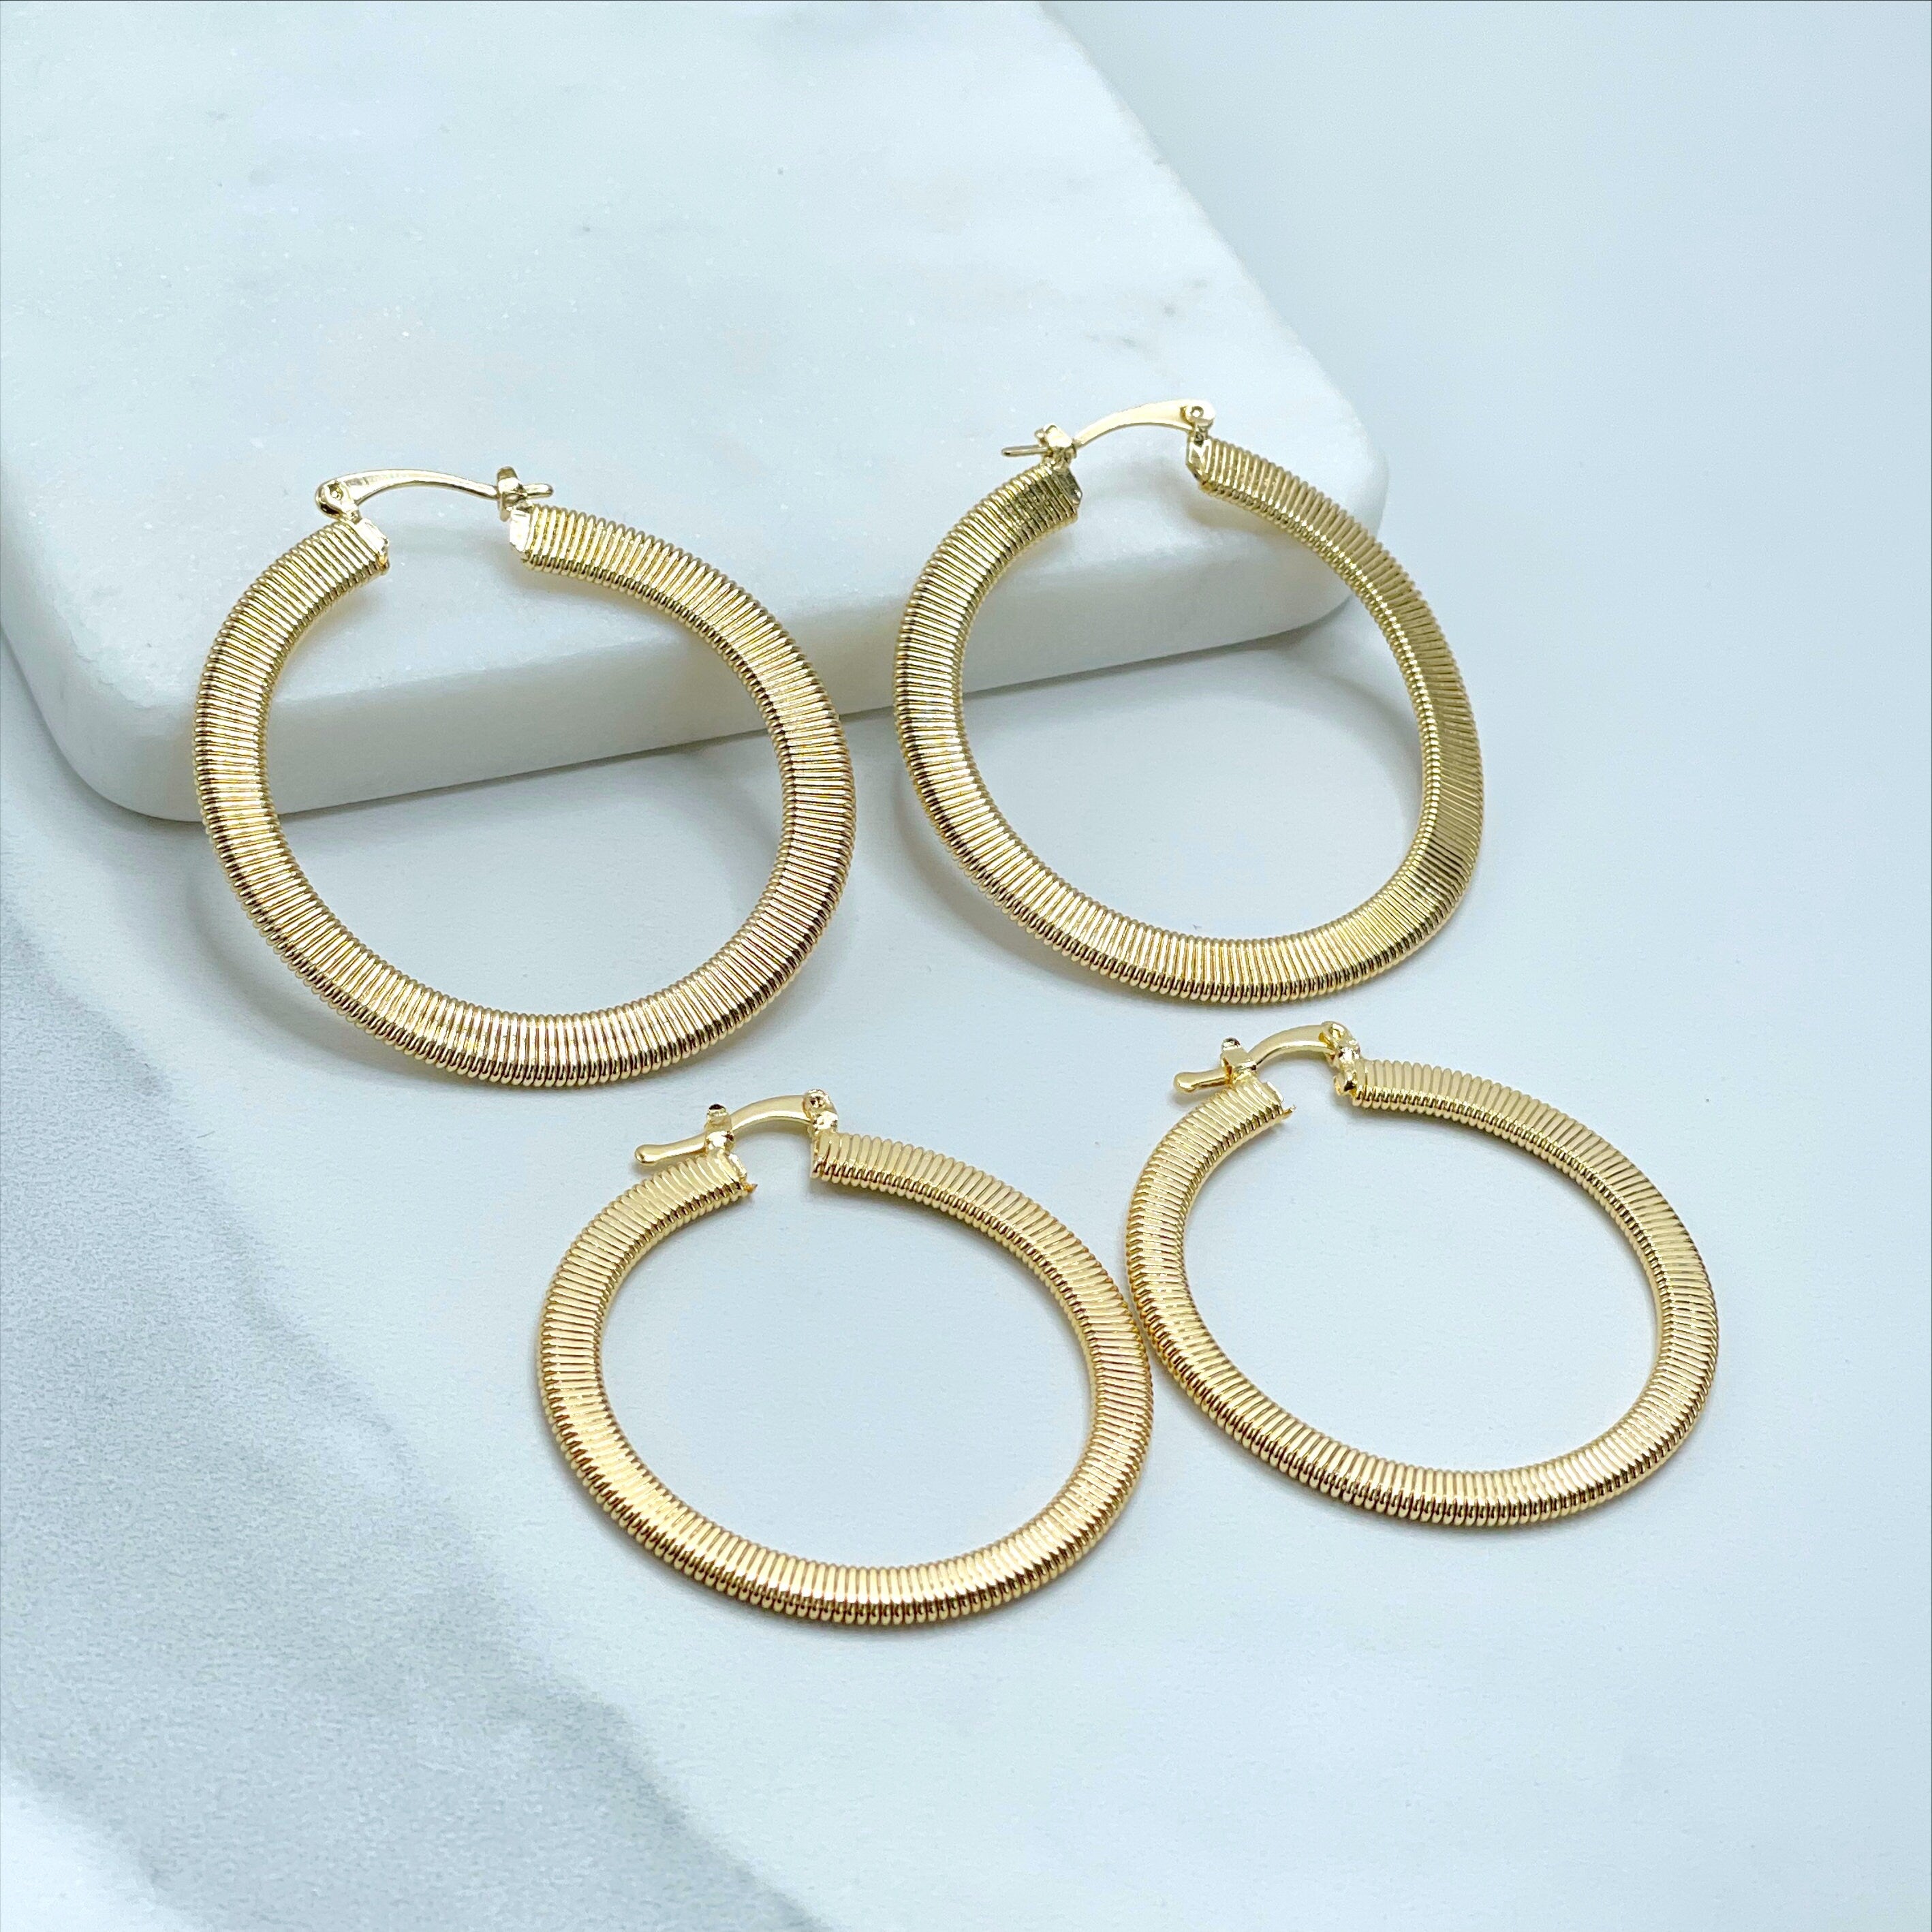 18K Gold Filled 45mm or 39mm Textured Hoops Earrings, Match Herringbone Design Wholesale Jewelry Making Supplies 39